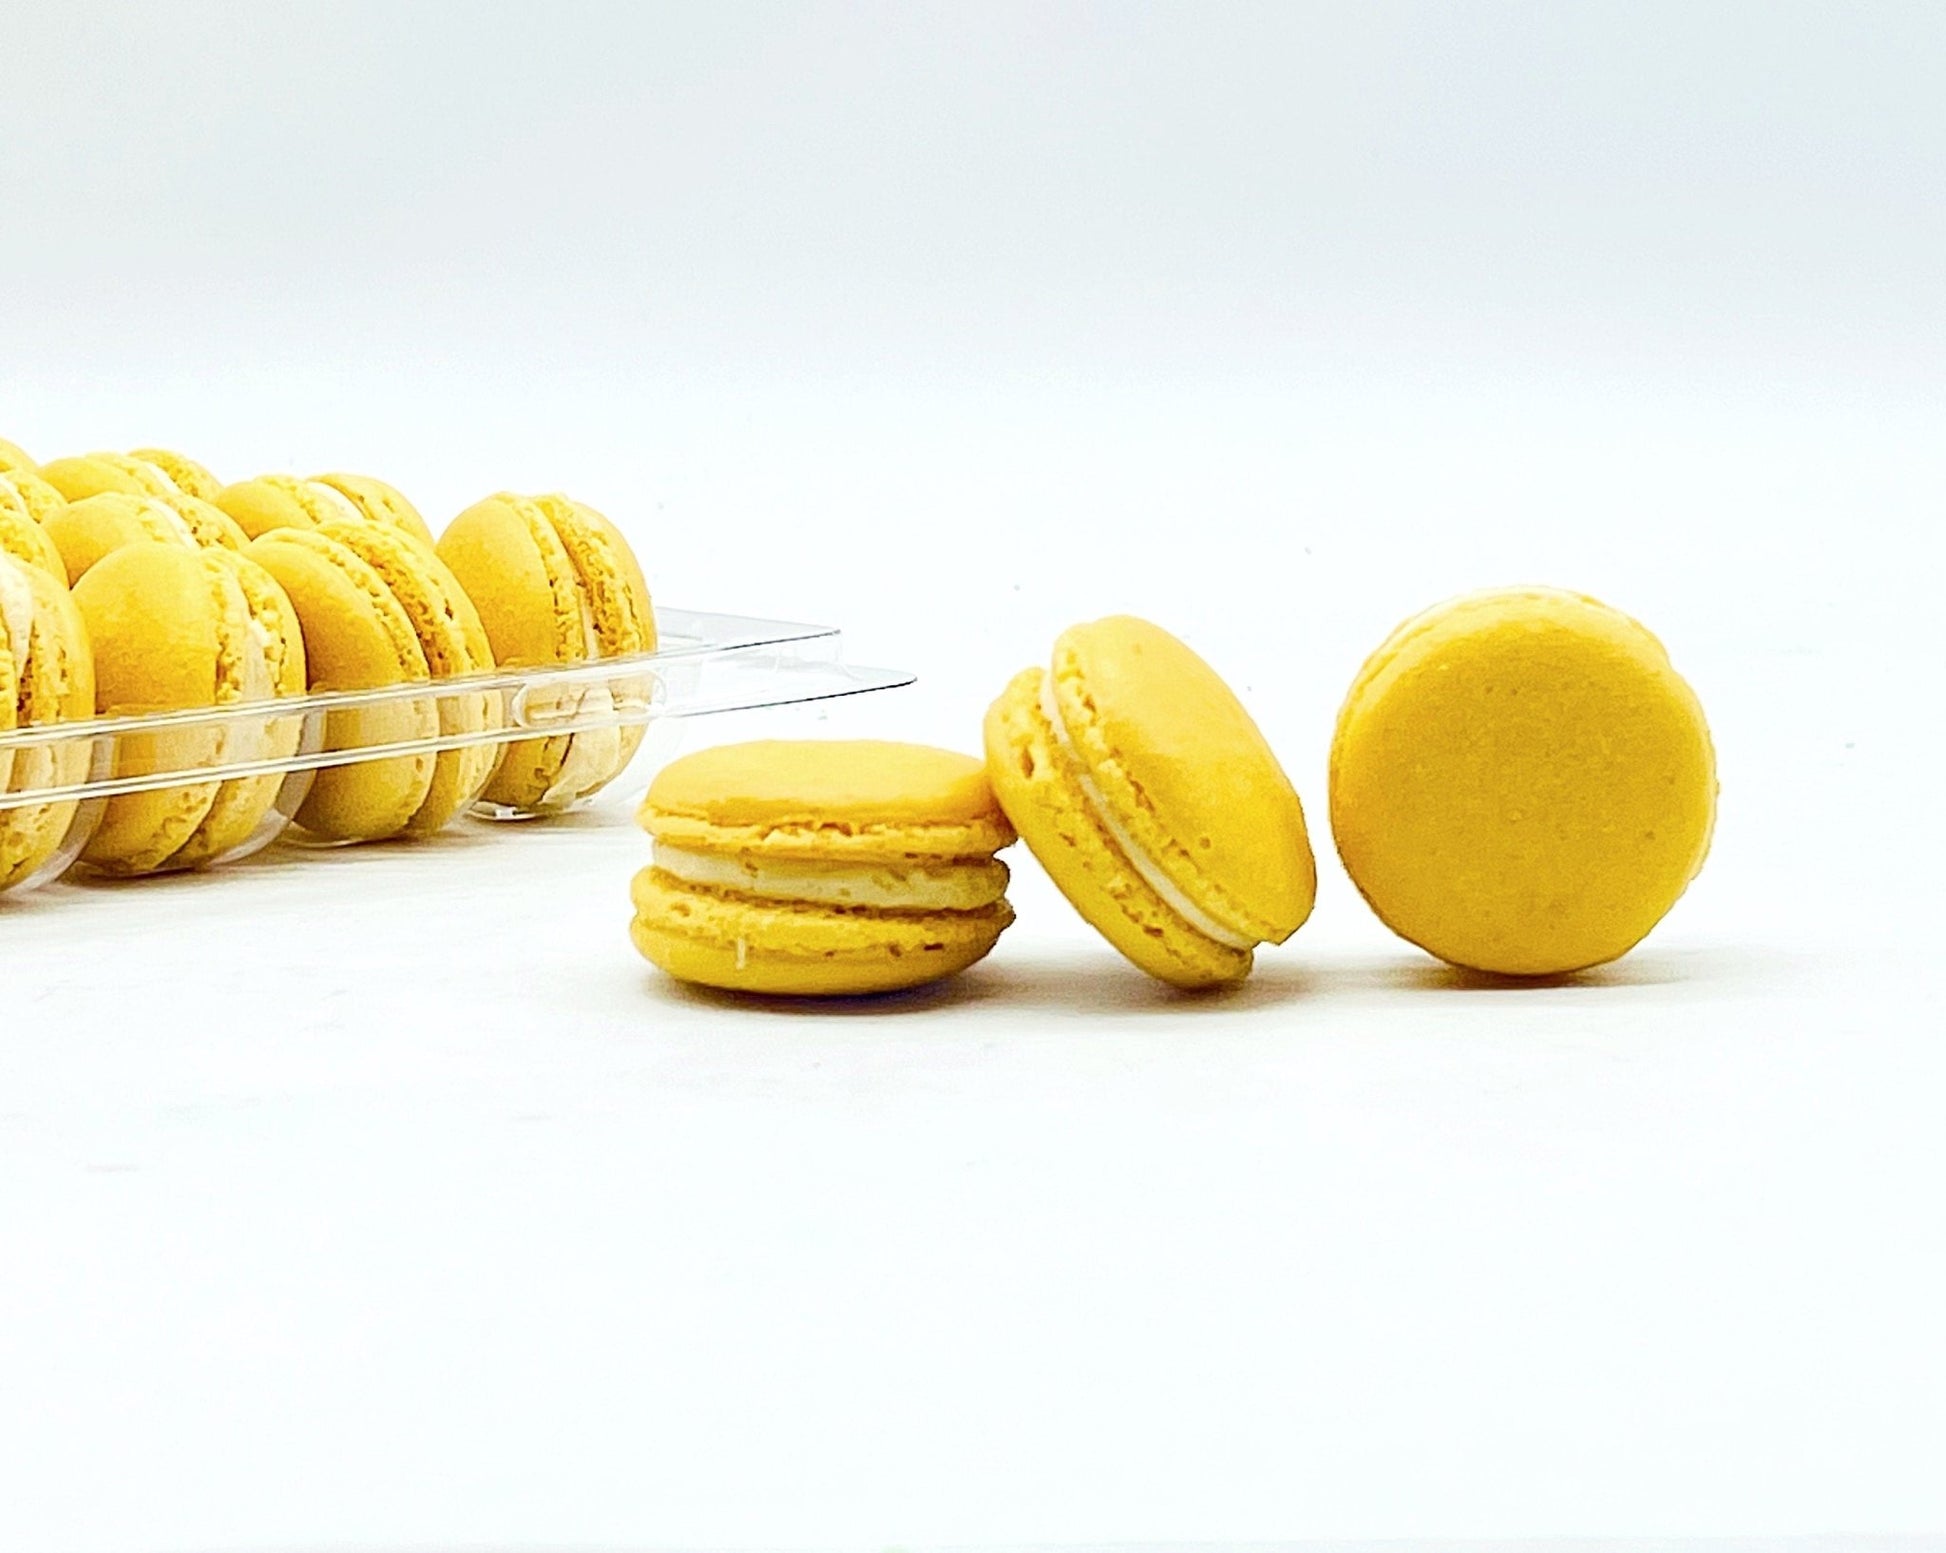 50 Pack Banana Peanut French Macaron Value Pack - Macaron Centrale